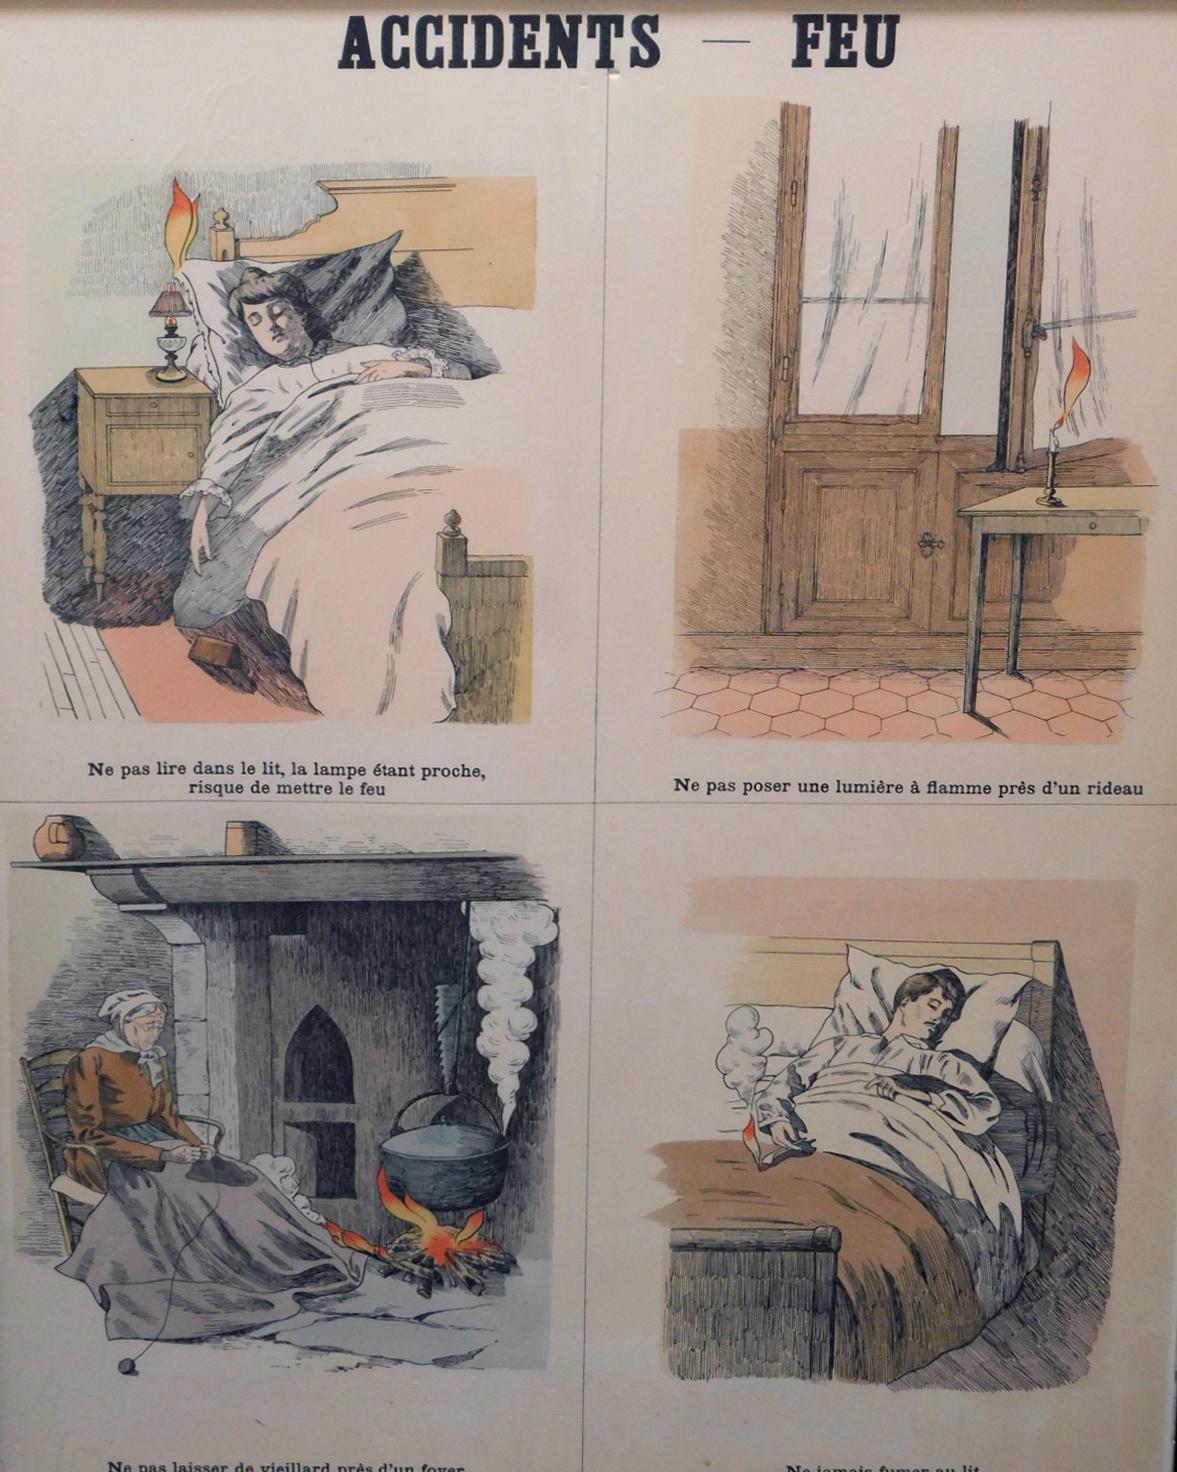 Napoleon III 8 French Teaching Posters for Accident Prevention by Les Fils d’Emile Deyrolle For Sale